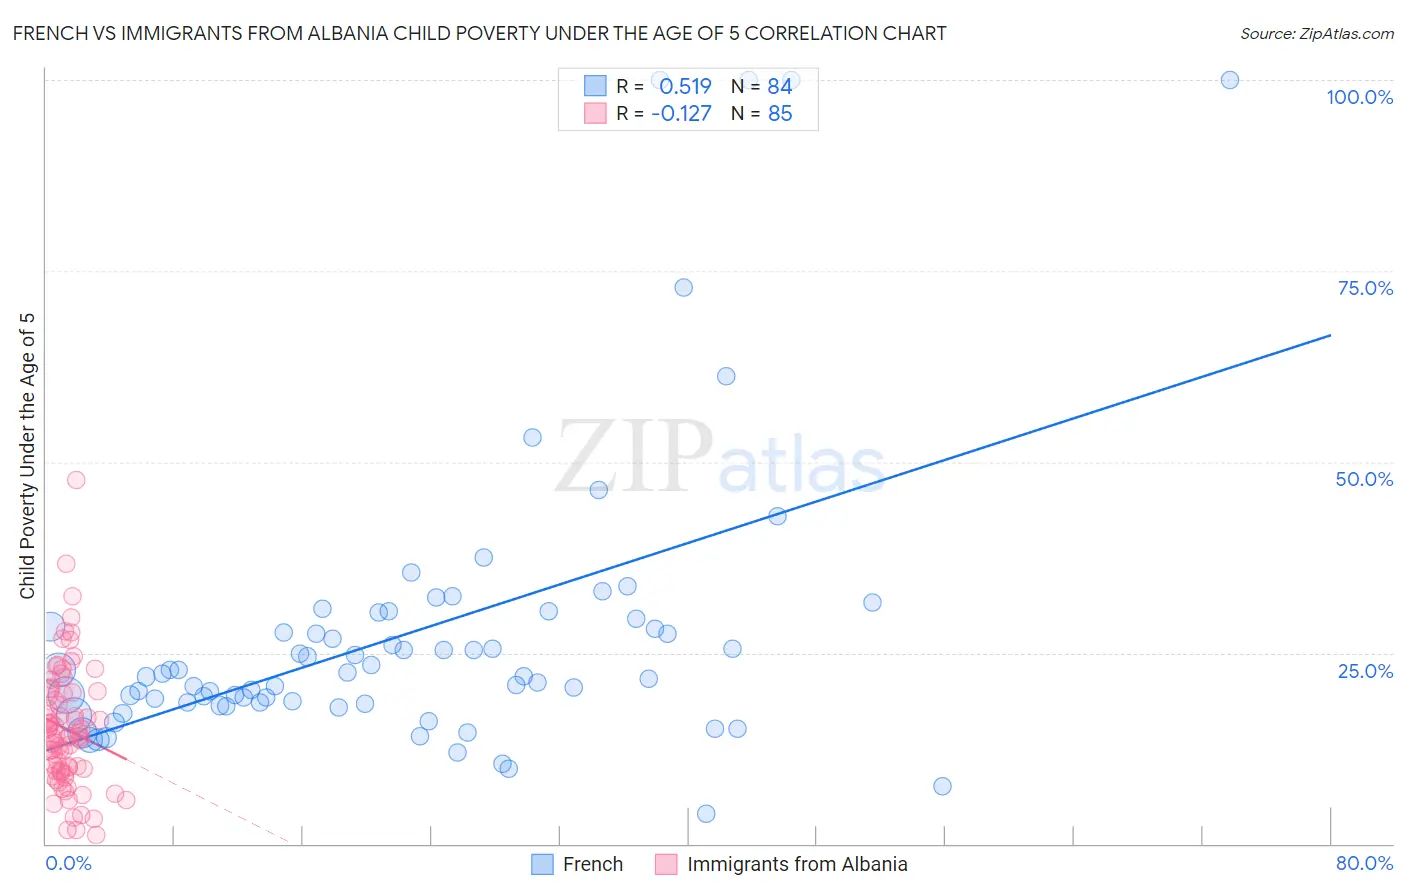 French vs Immigrants from Albania Child Poverty Under the Age of 5